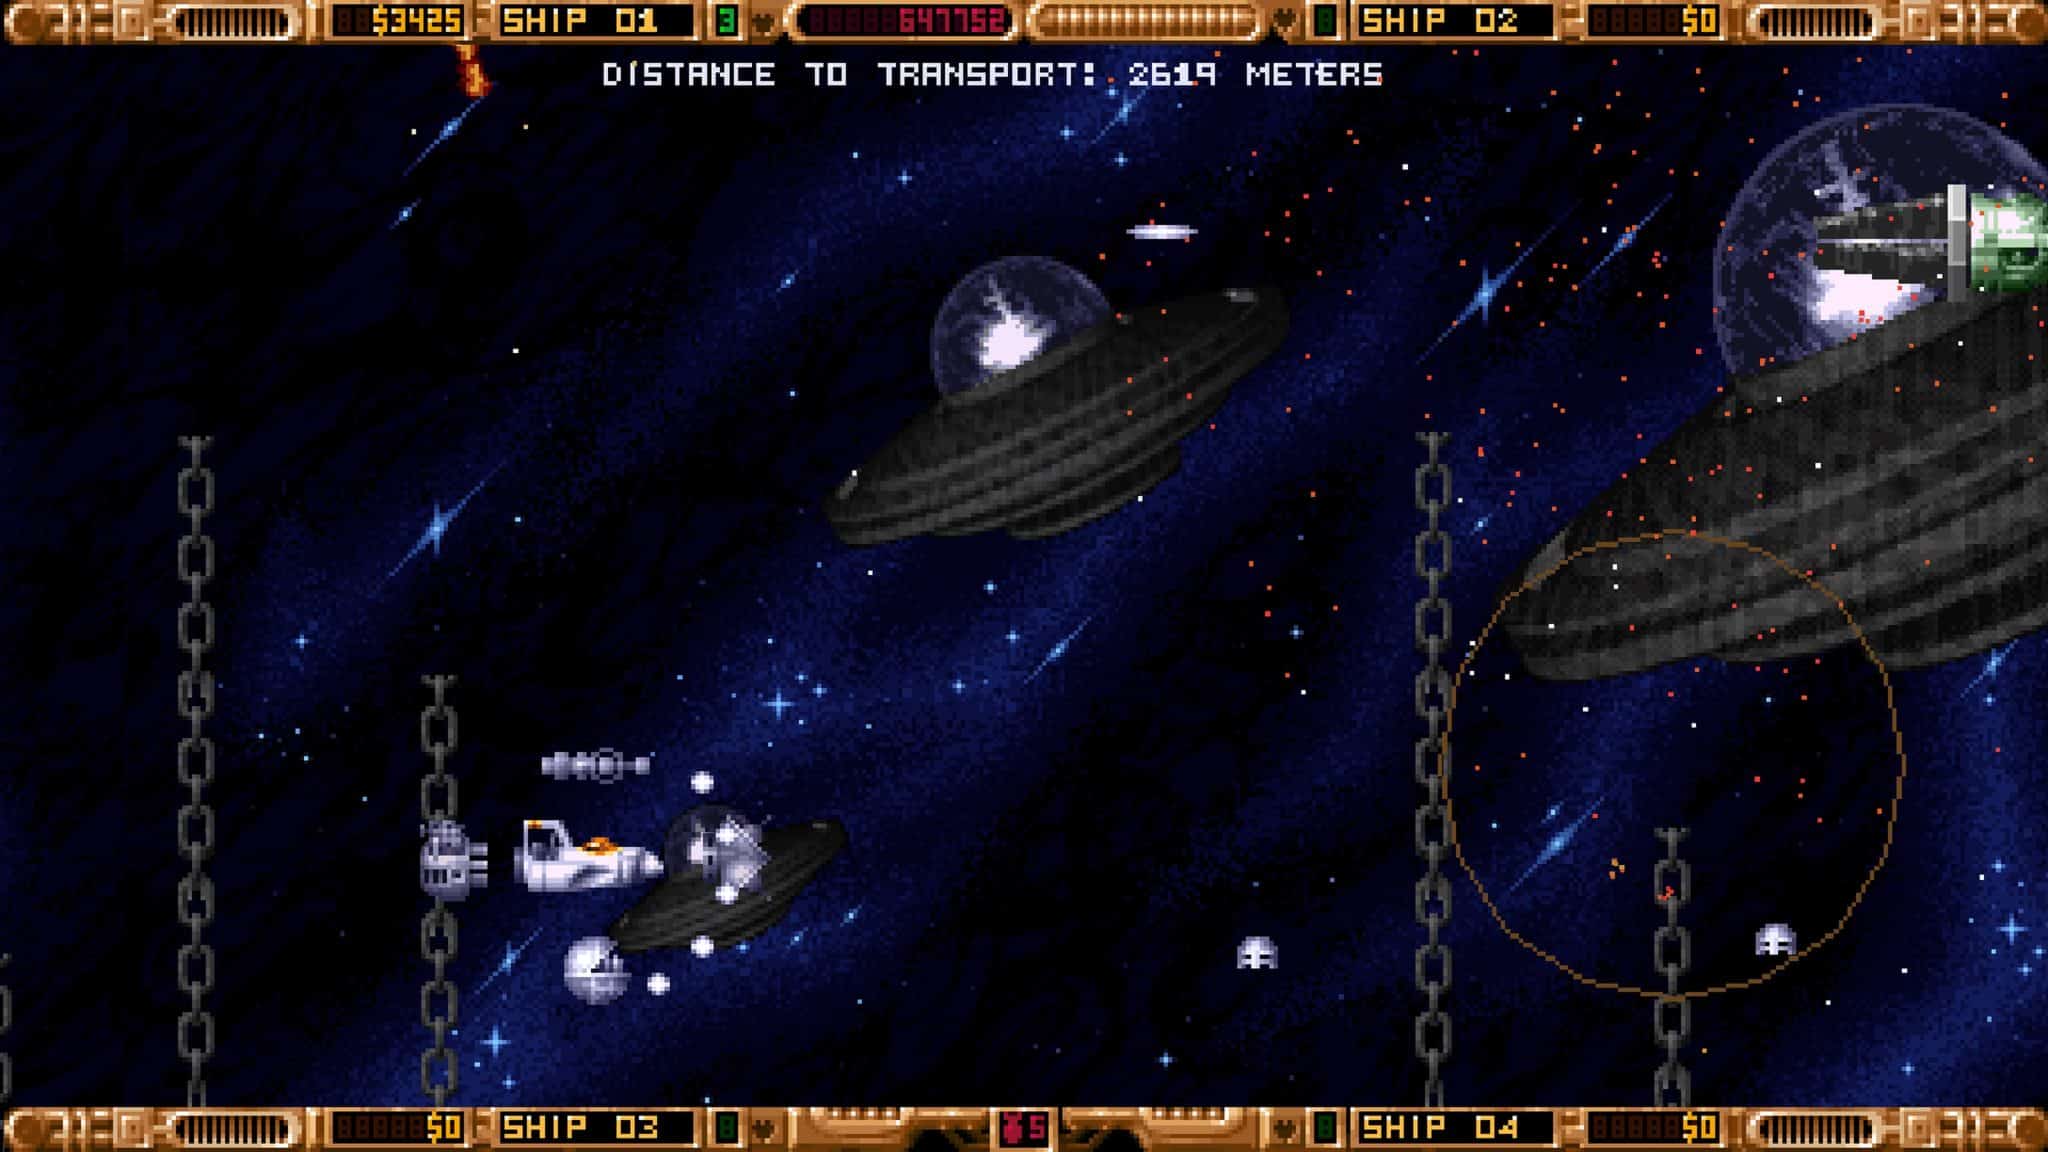 New Amiga game 'Dylan the Spaceman' demo now available! – Vintage